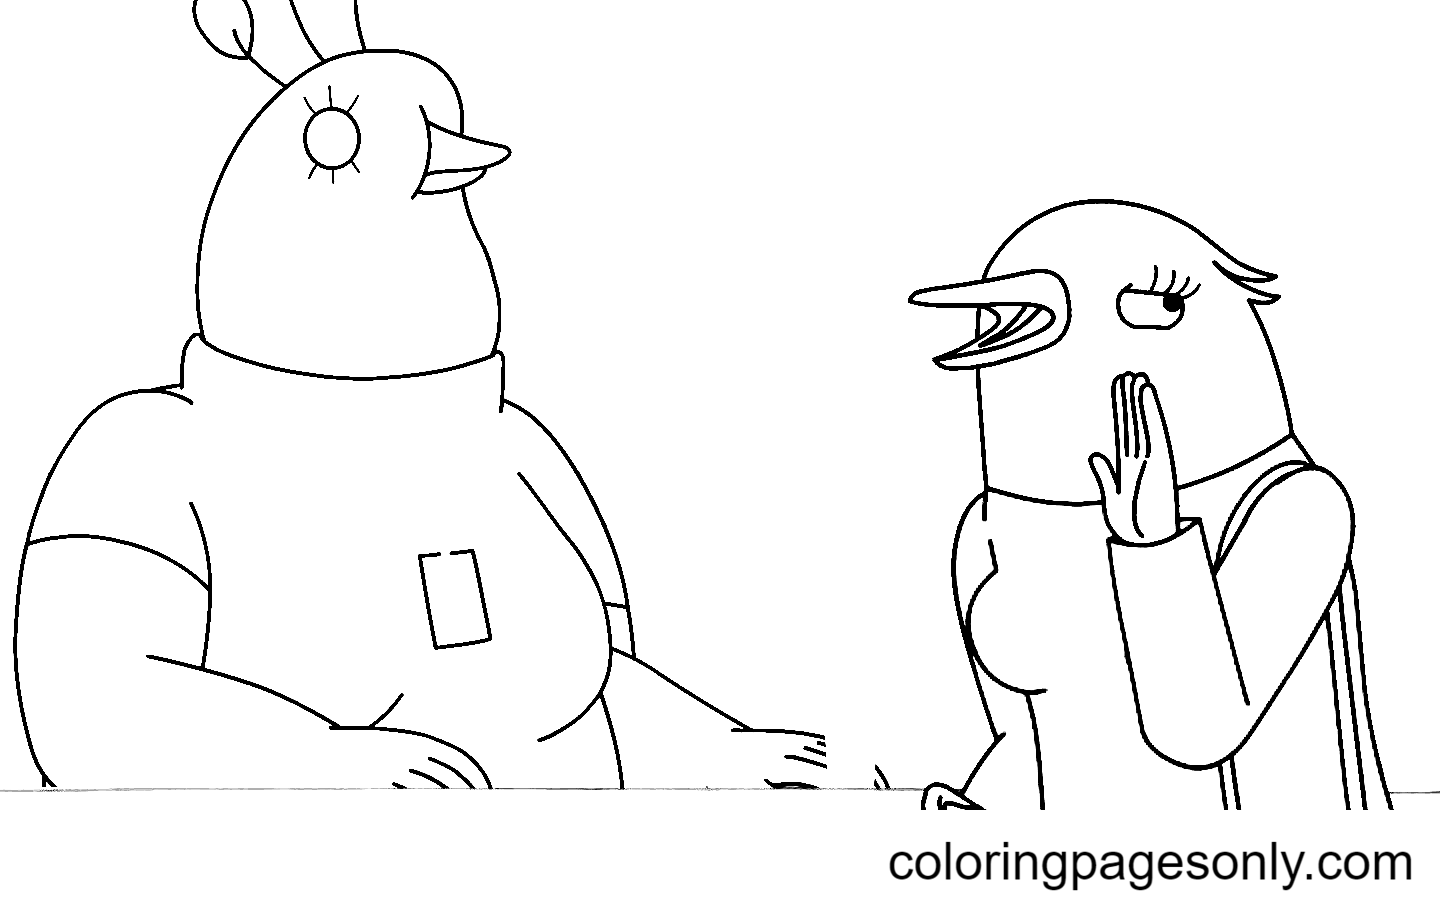 Tuca & Bertie Vibe Check Coloring Page